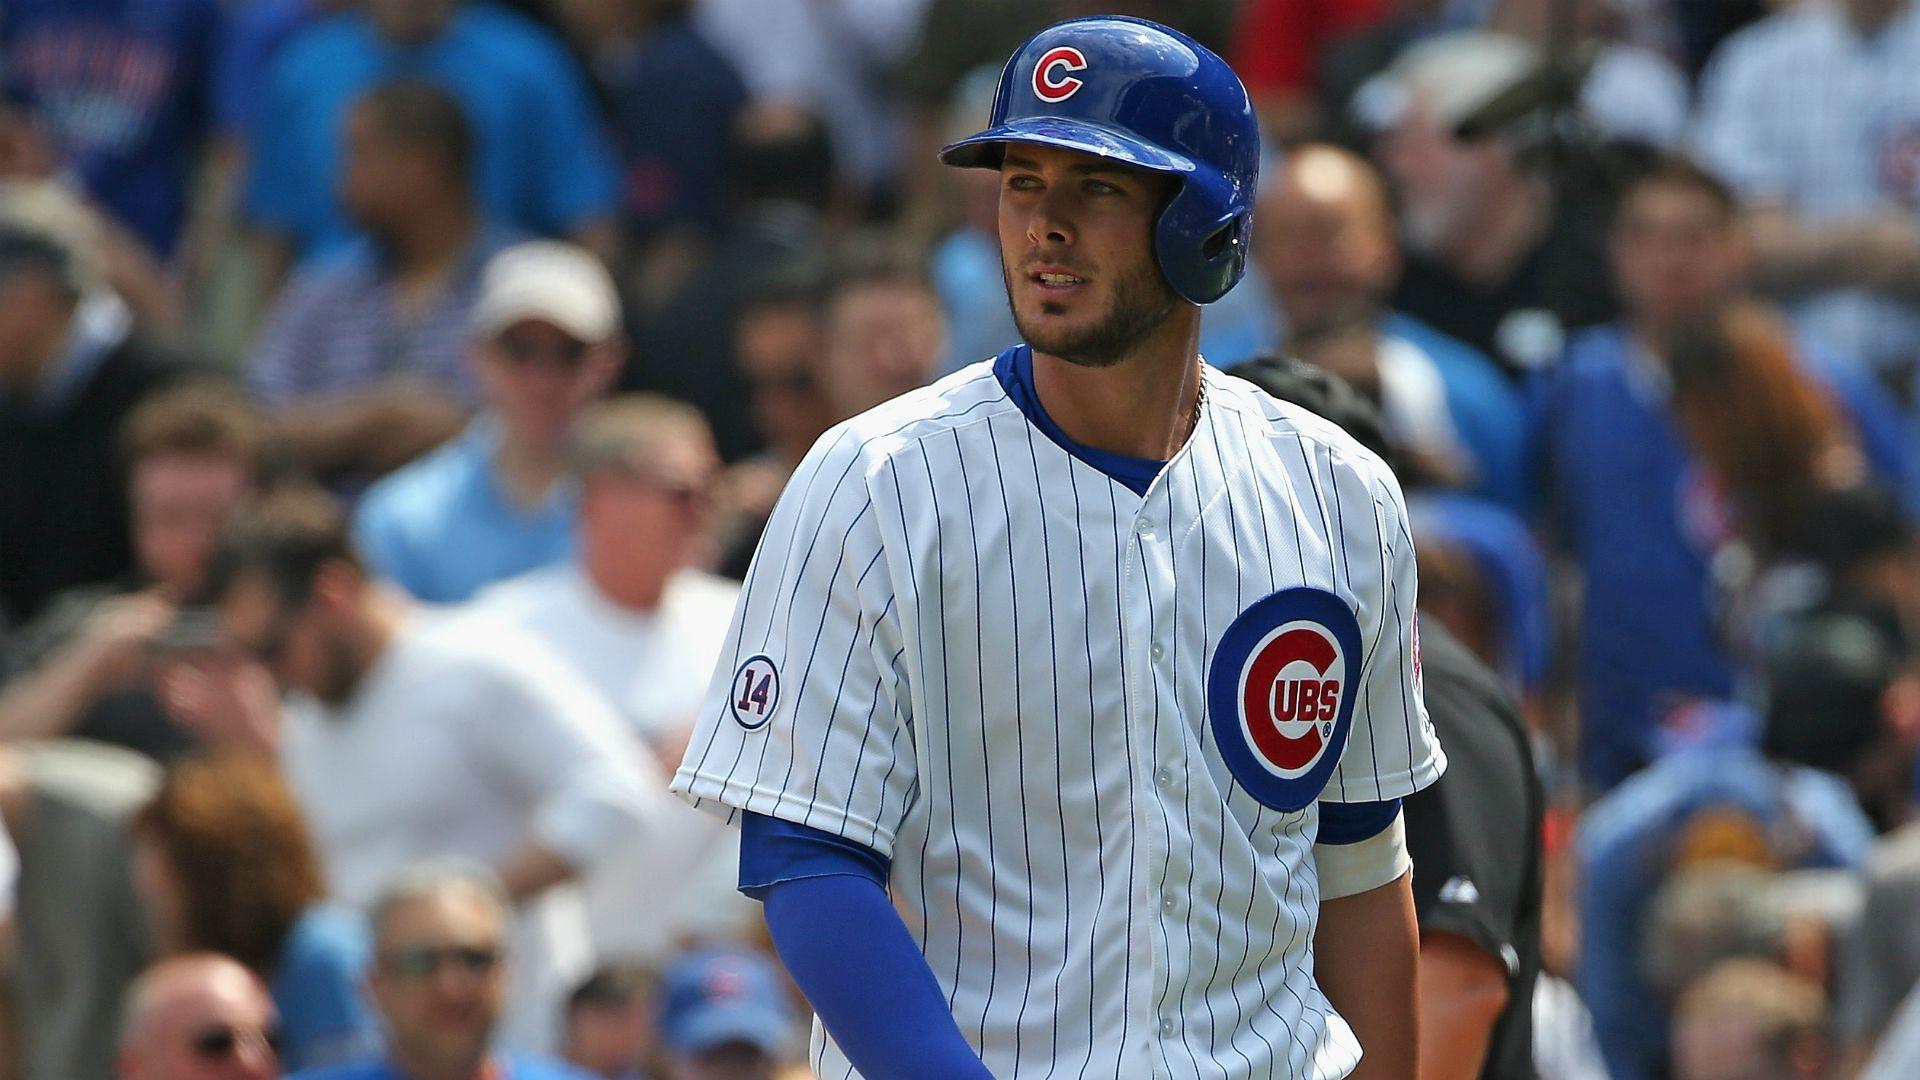 Cubs fan yells 'You suck!' at Kris Bryant after third strikeout